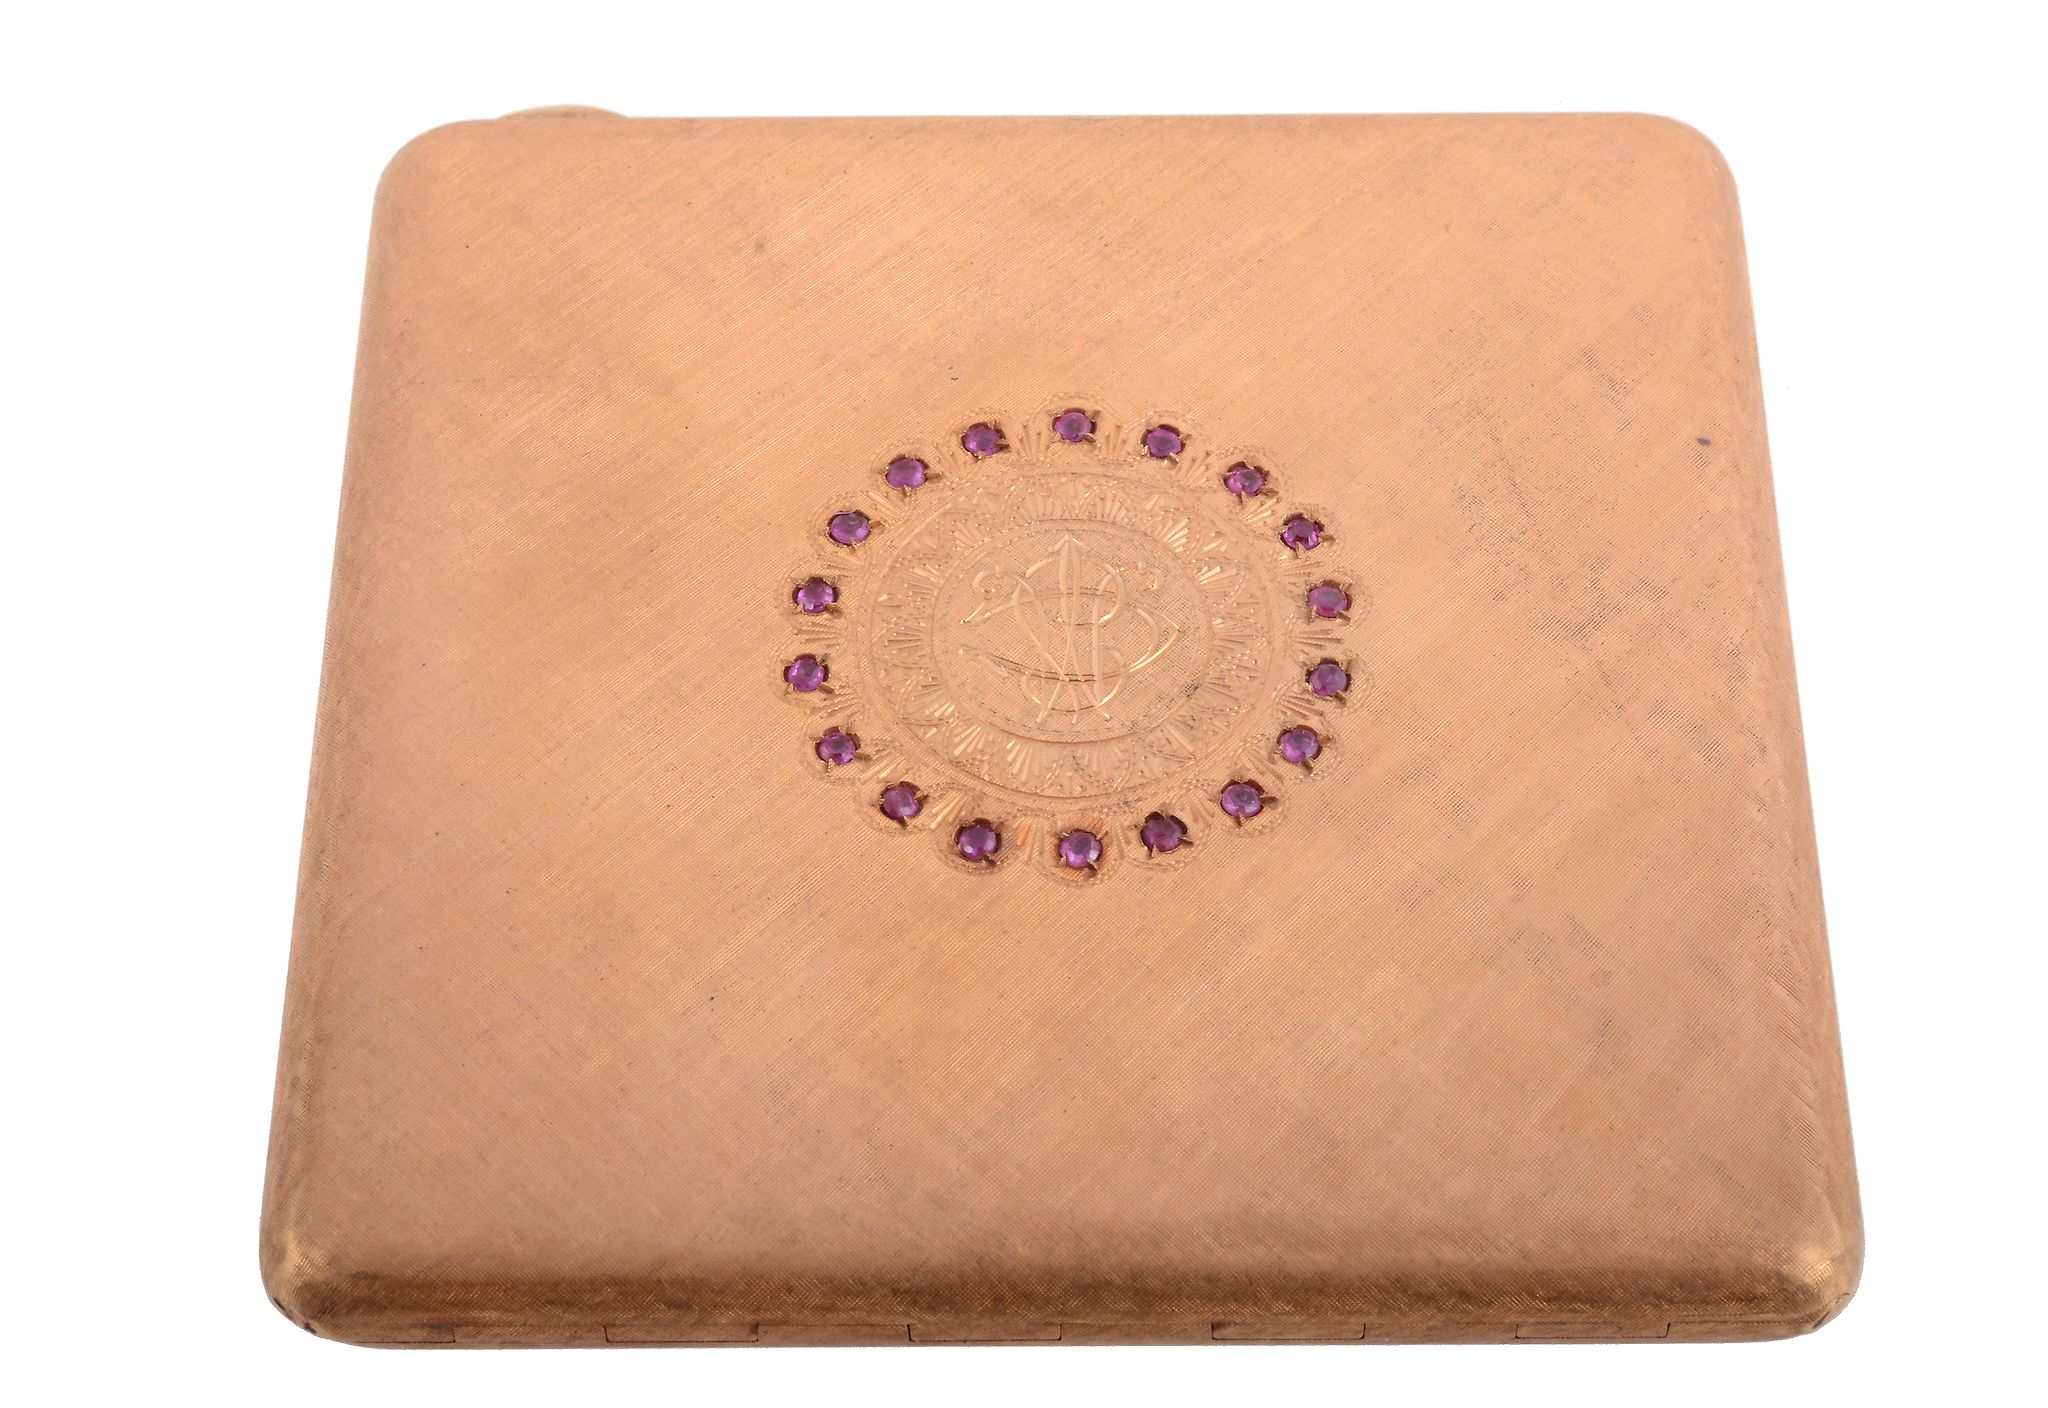 An Italian gold coloured ruby mounted square powder compact, 1944-68 Milan control mark, K18 and